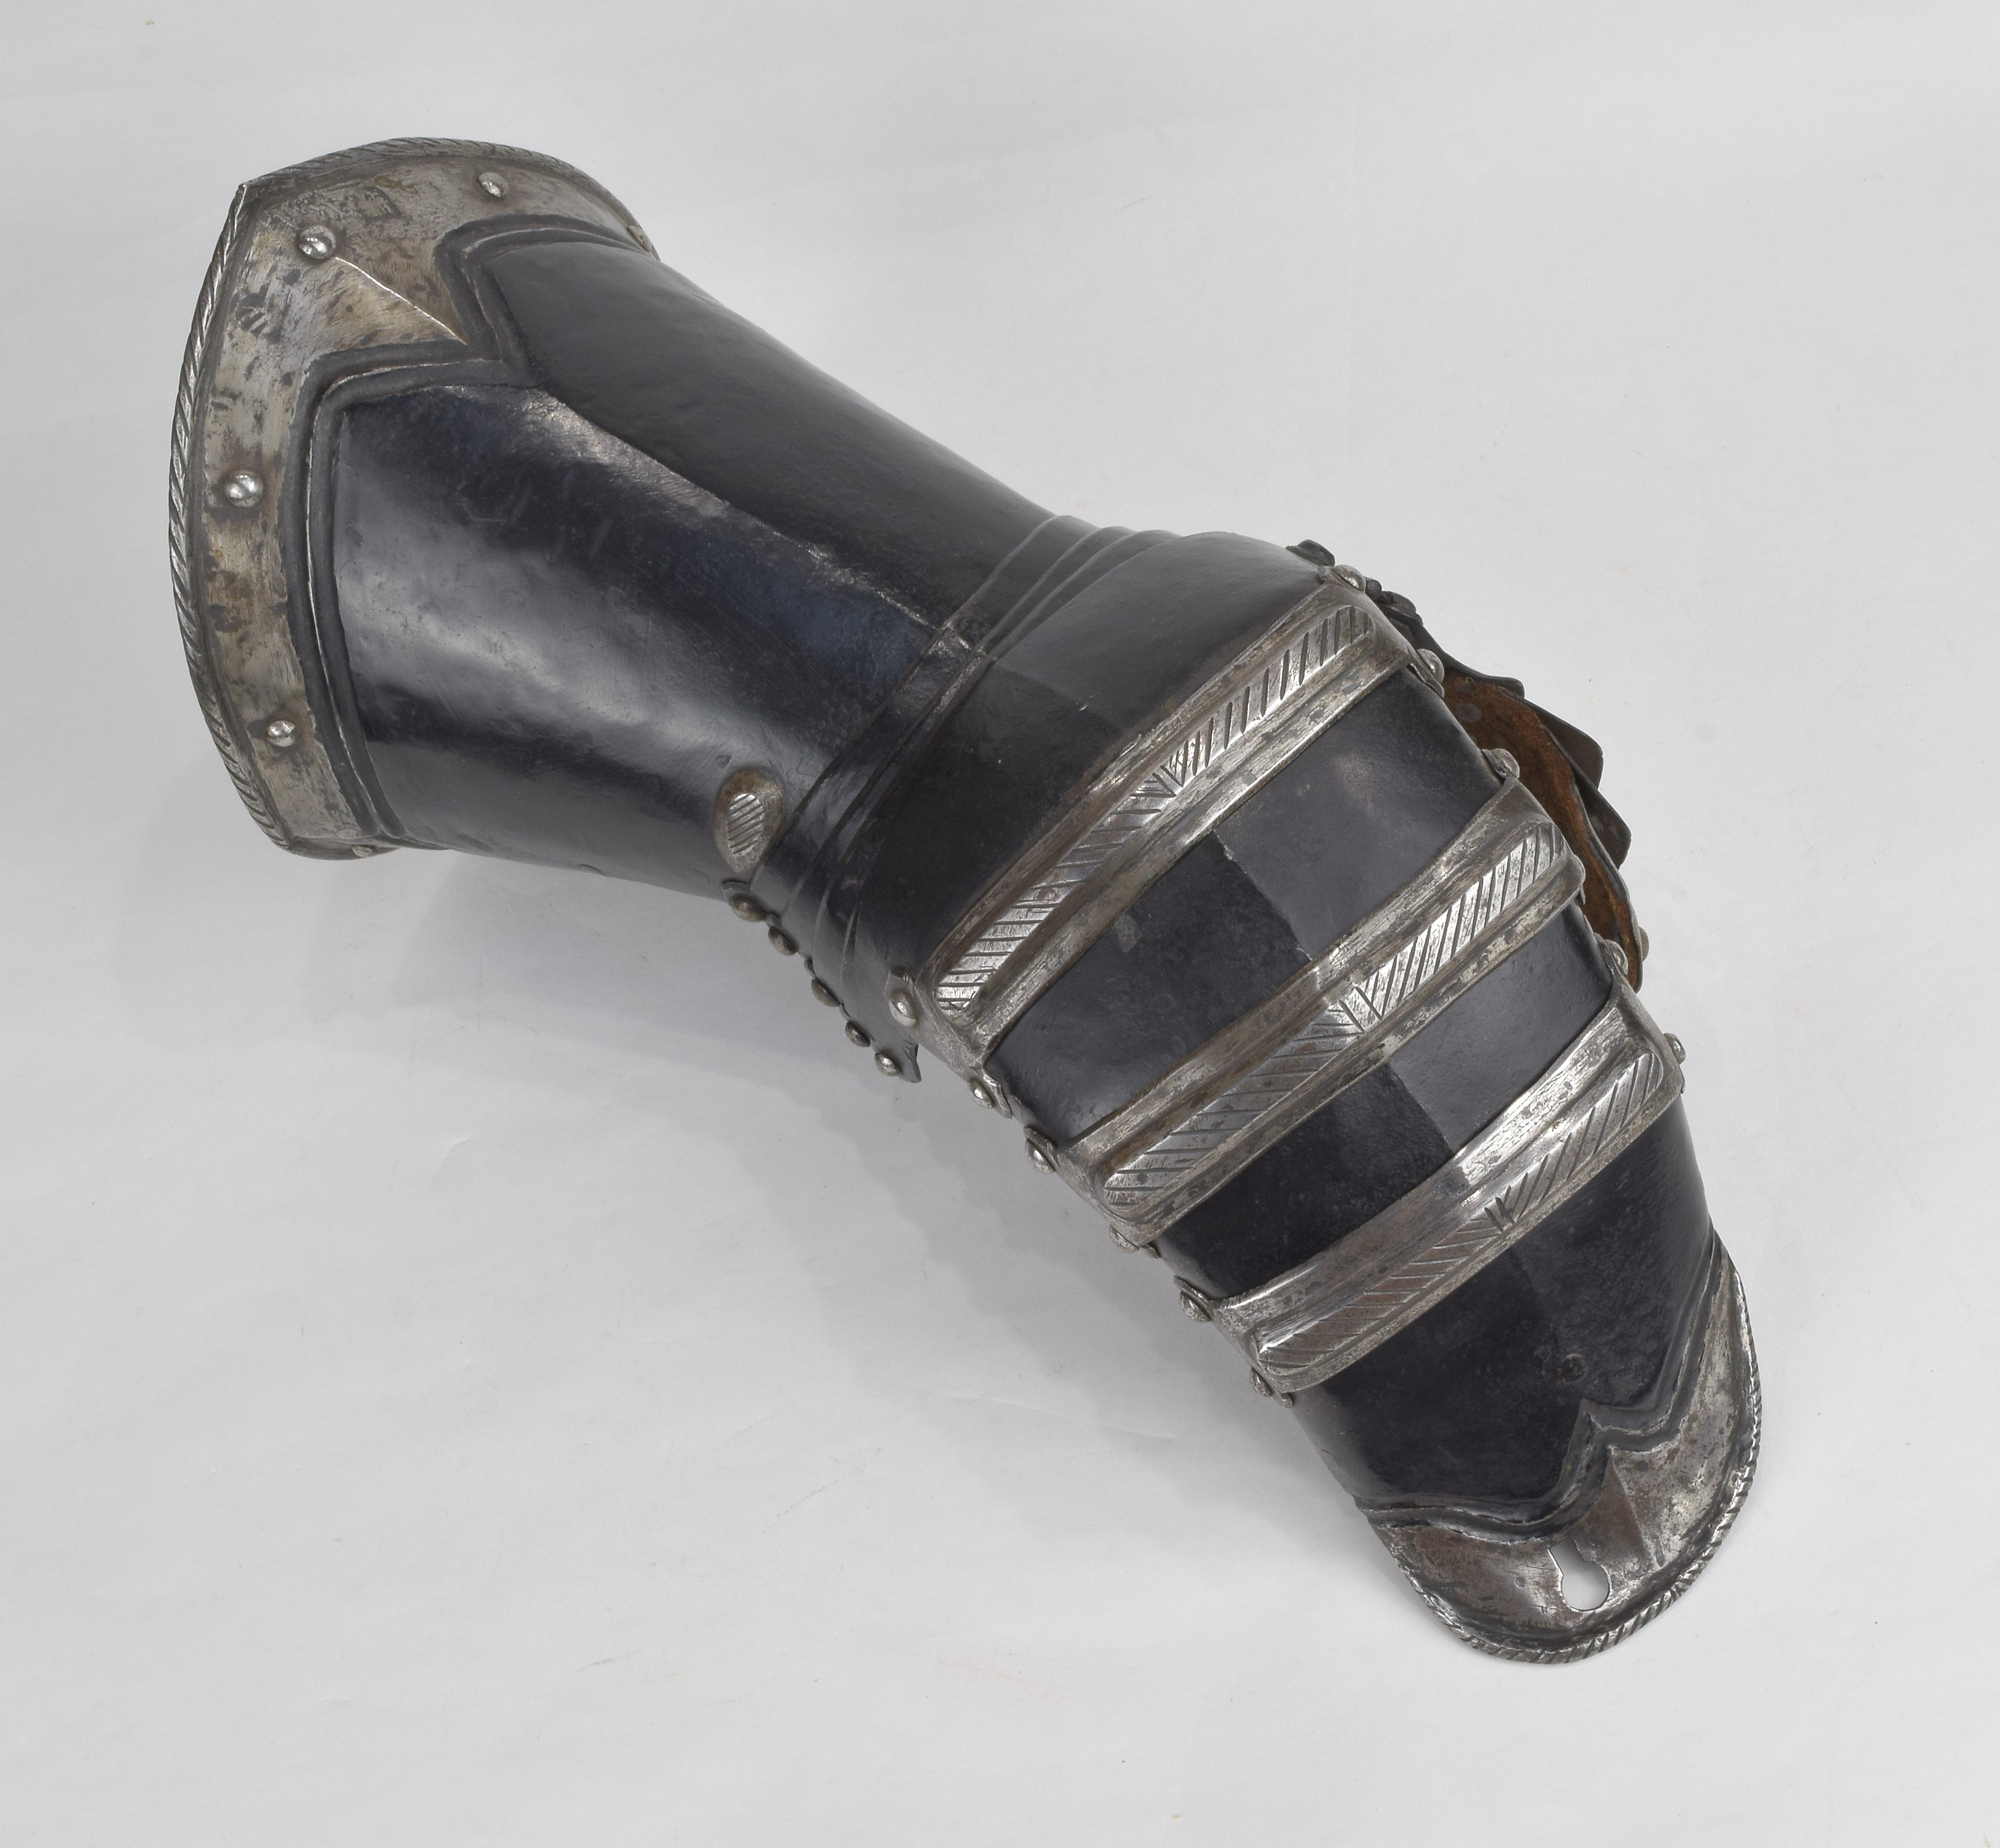 German Gauntlets - A-99-right-straight-pinky-b